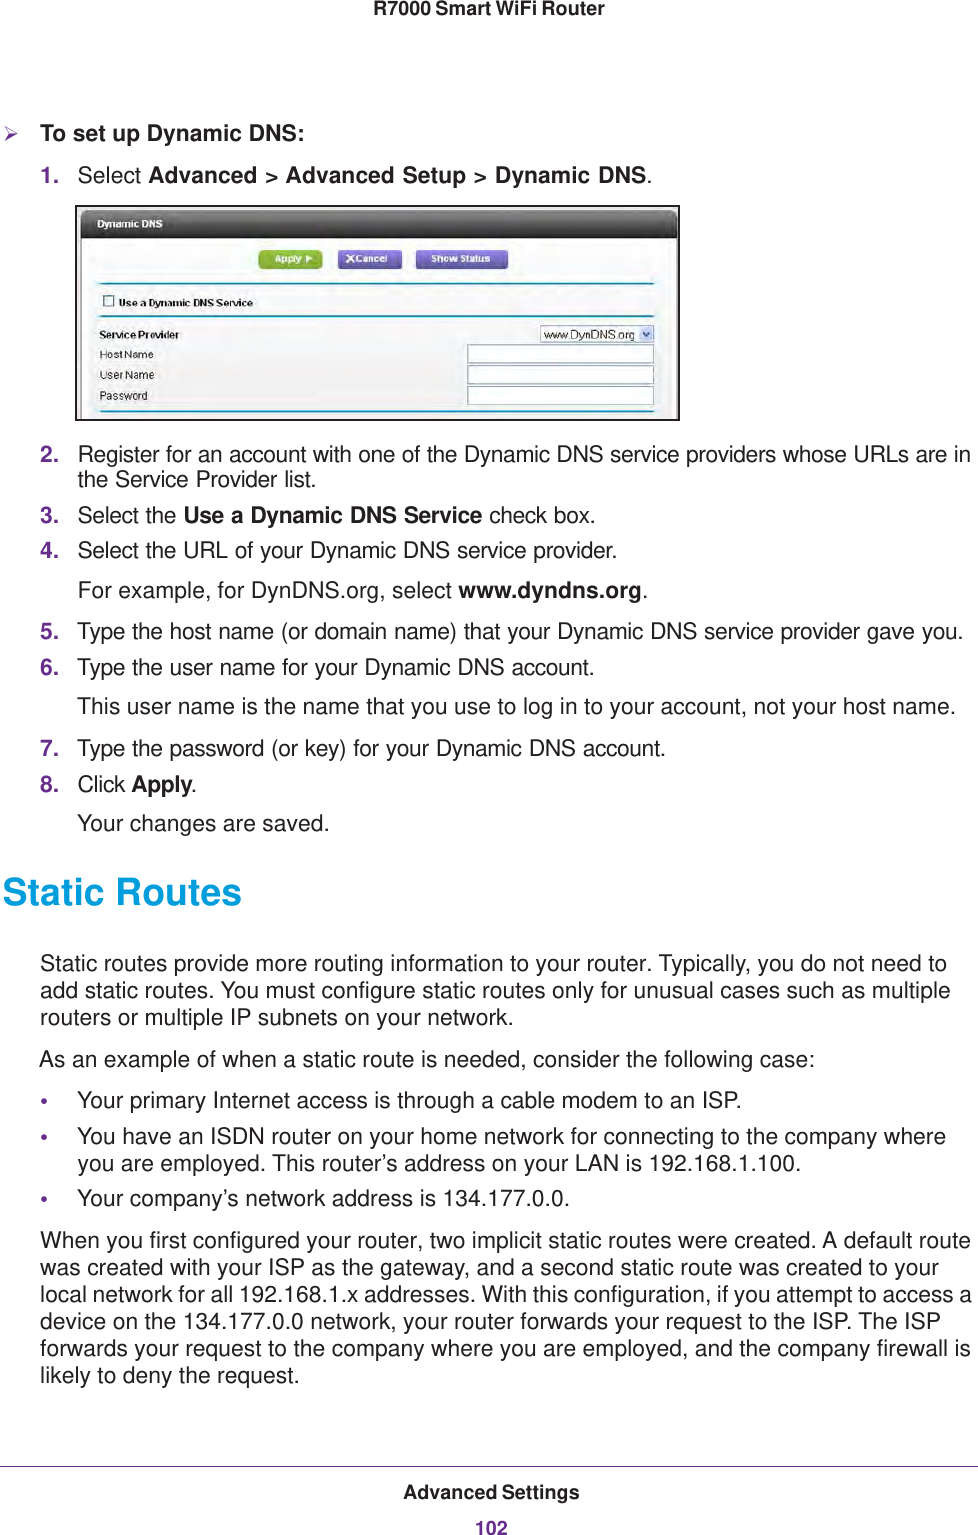 Advanced Settings102R7000 Smart WiFi Router To set up Dynamic DNS:1. Select Advanced &gt; Advanced Setup &gt; Dynamic DNS.2. Register for an account with one of the Dynamic DNS service providers whose URLs are in the Service Provider list. 3. Select the Use a Dynamic DNS Service check box. 4. Select the URL of your Dynamic DNS service provider. For example, for DynDNS.org, select www.dyndns.org.5. Type the host name (or domain name) that your Dynamic DNS service provider gave you.6. Type the user name for your Dynamic DNS account. This user name is the name that you use to log in to your account, not your host name.7. Type the password (or key) for your Dynamic DNS account. 8. Click Apply.Your changes are saved.Static RoutesStatic routes provide more routing information to your router. Typically, you do not need to add static routes. You must configure static routes only for unusual cases such as multiple routers or multiple IP subnets on your network.As an example of when a static route is needed, consider the following case:•Your primary Internet access is through a cable modem to an ISP.•You have an ISDN router on your home network for connecting to the company where you are employed. This router’s address on your LAN is 192.168.1.100.•Your company’s network address is 134.177.0.0.When you first configured your router, two implicit static routes were created. A default route was created with your ISP as the gateway, and a second static route was created to your local network for all 192.168.1.x addresses. With this configuration, if you attempt to access a device on the 134.177.0.0 network, your router forwards your request to the ISP. The ISP forwards your request to the company where you are employed, and the company firewall is likely to deny the request.